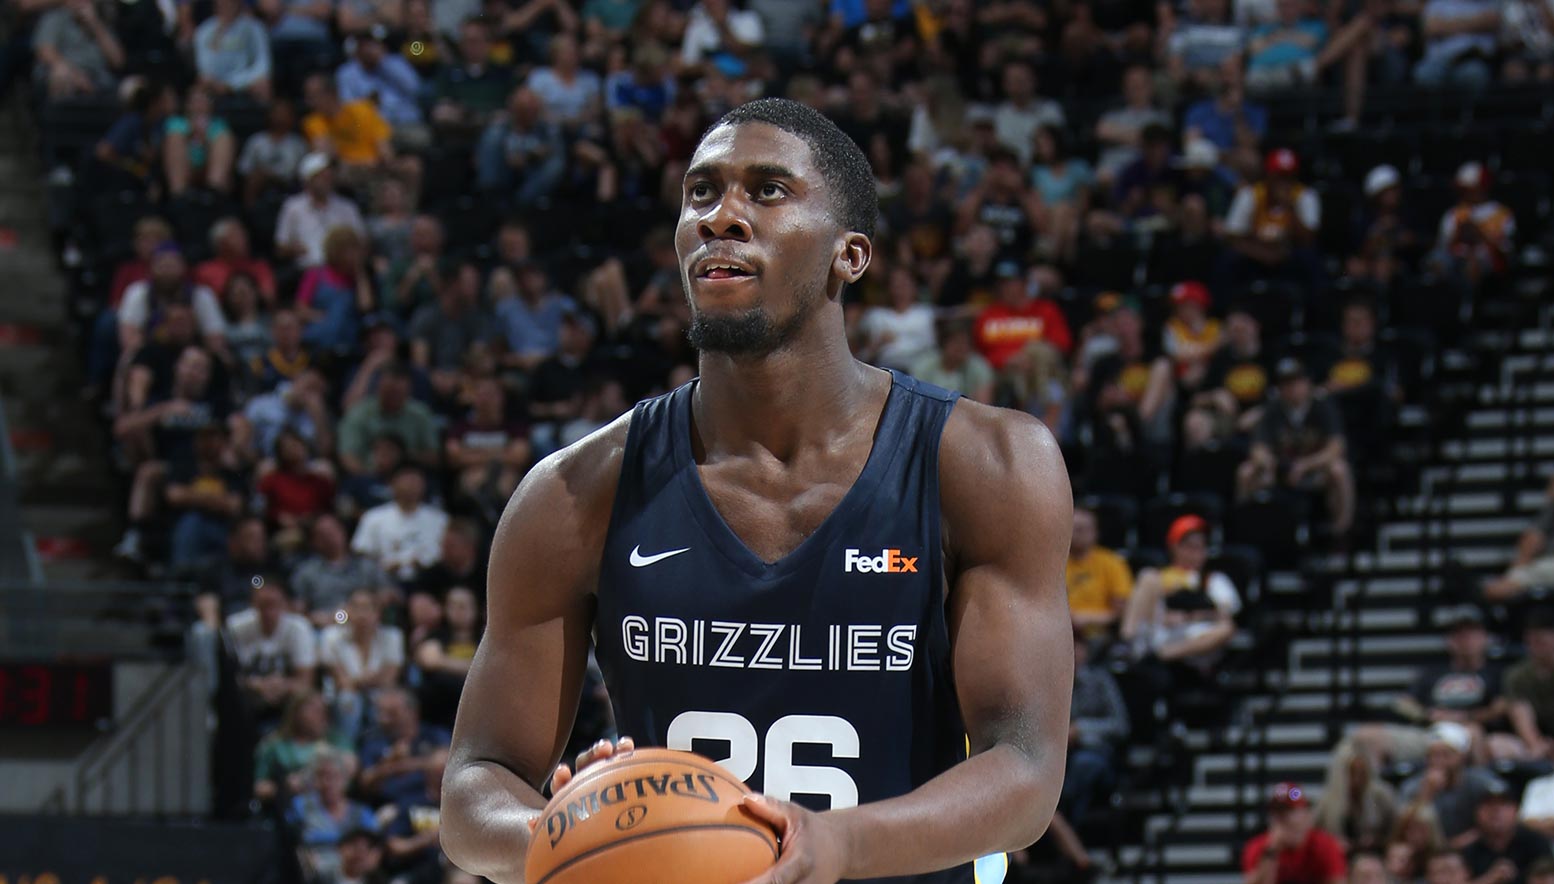 MikeCheck: Once-heralded Shittu eager to regain ground with Grizzlies after rocky NBA transition